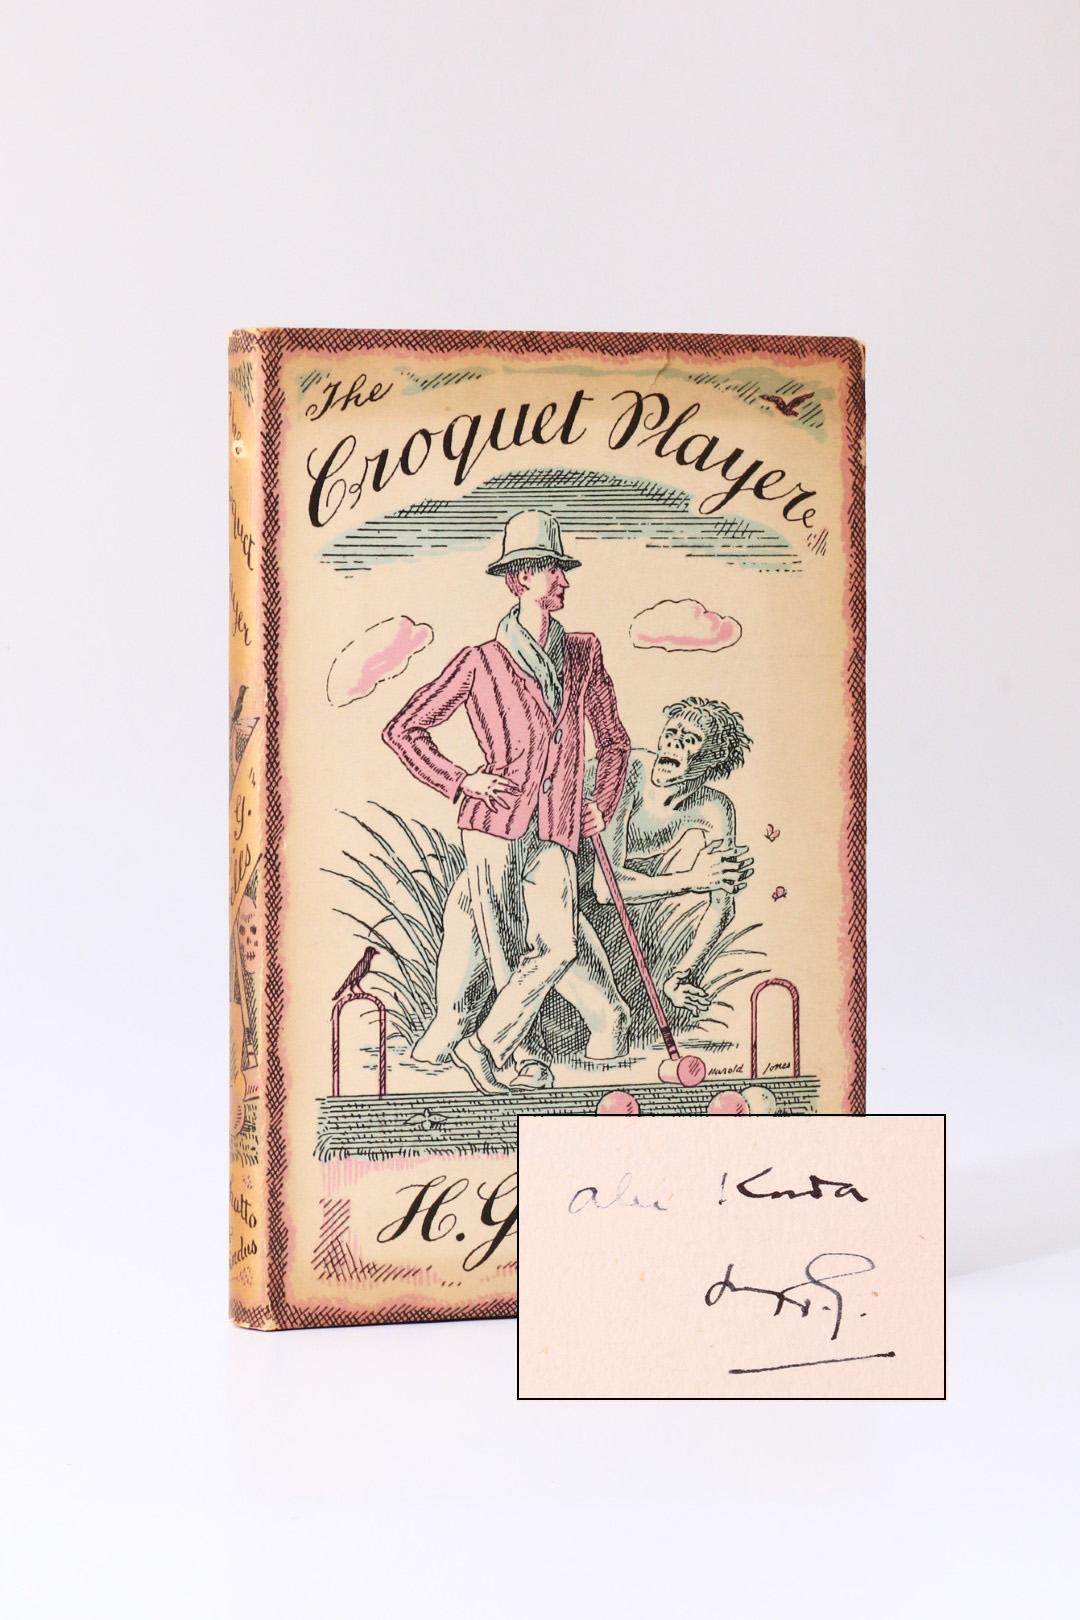 H.G. Wells - The Croquet Player - An Association Copy - Chatto & Windus, 1936, Signed First Edition.